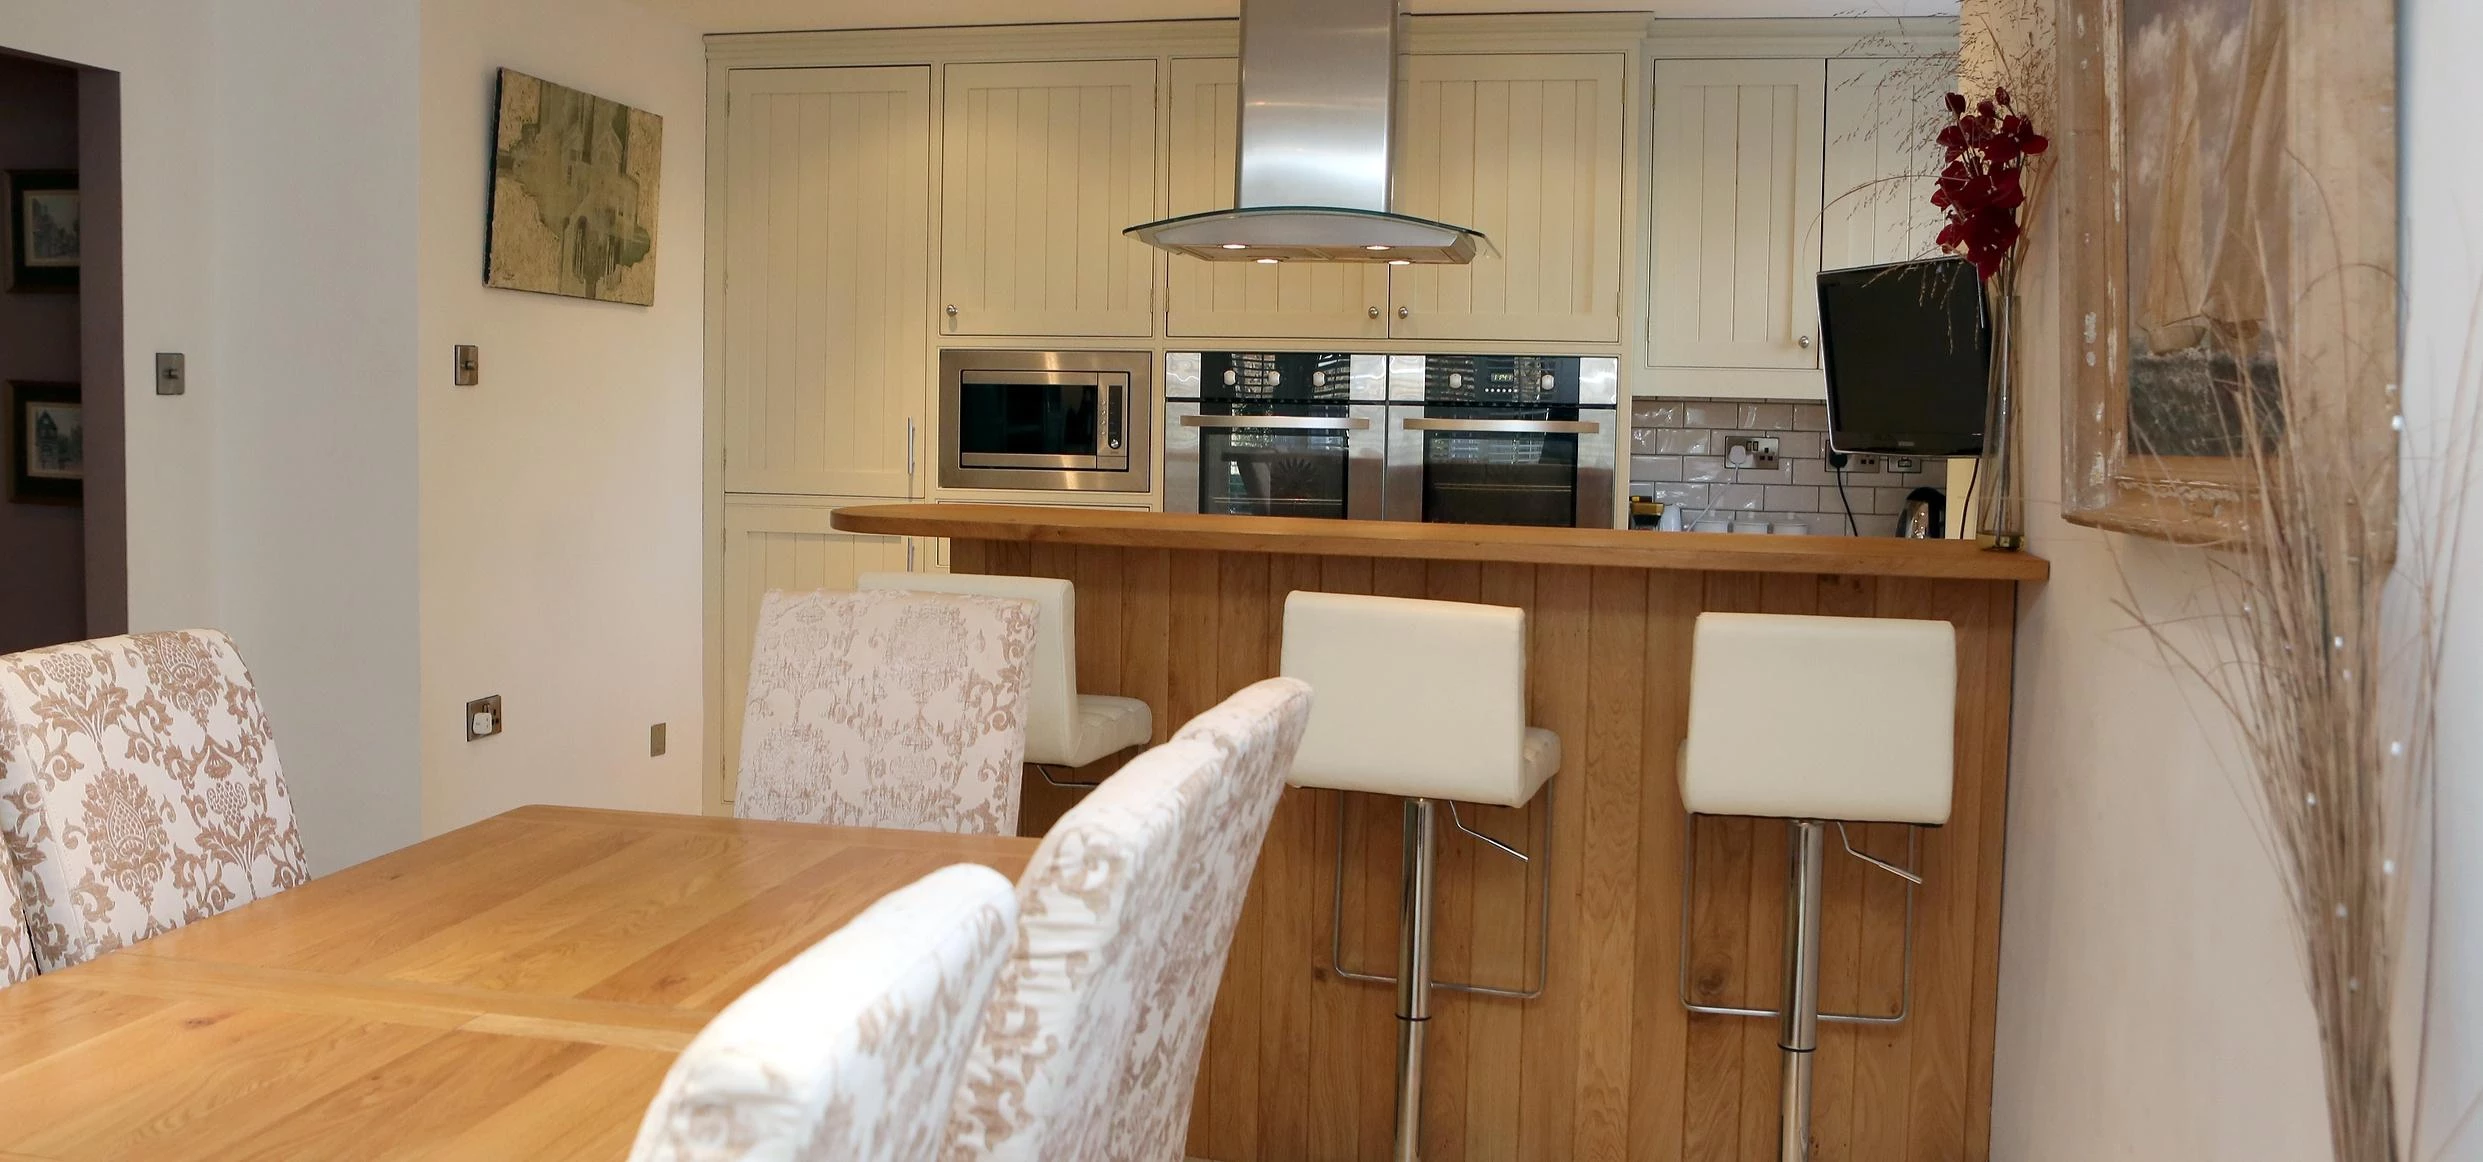 5* Serviced Apartment in Yarm - for Corporate Business Travellers